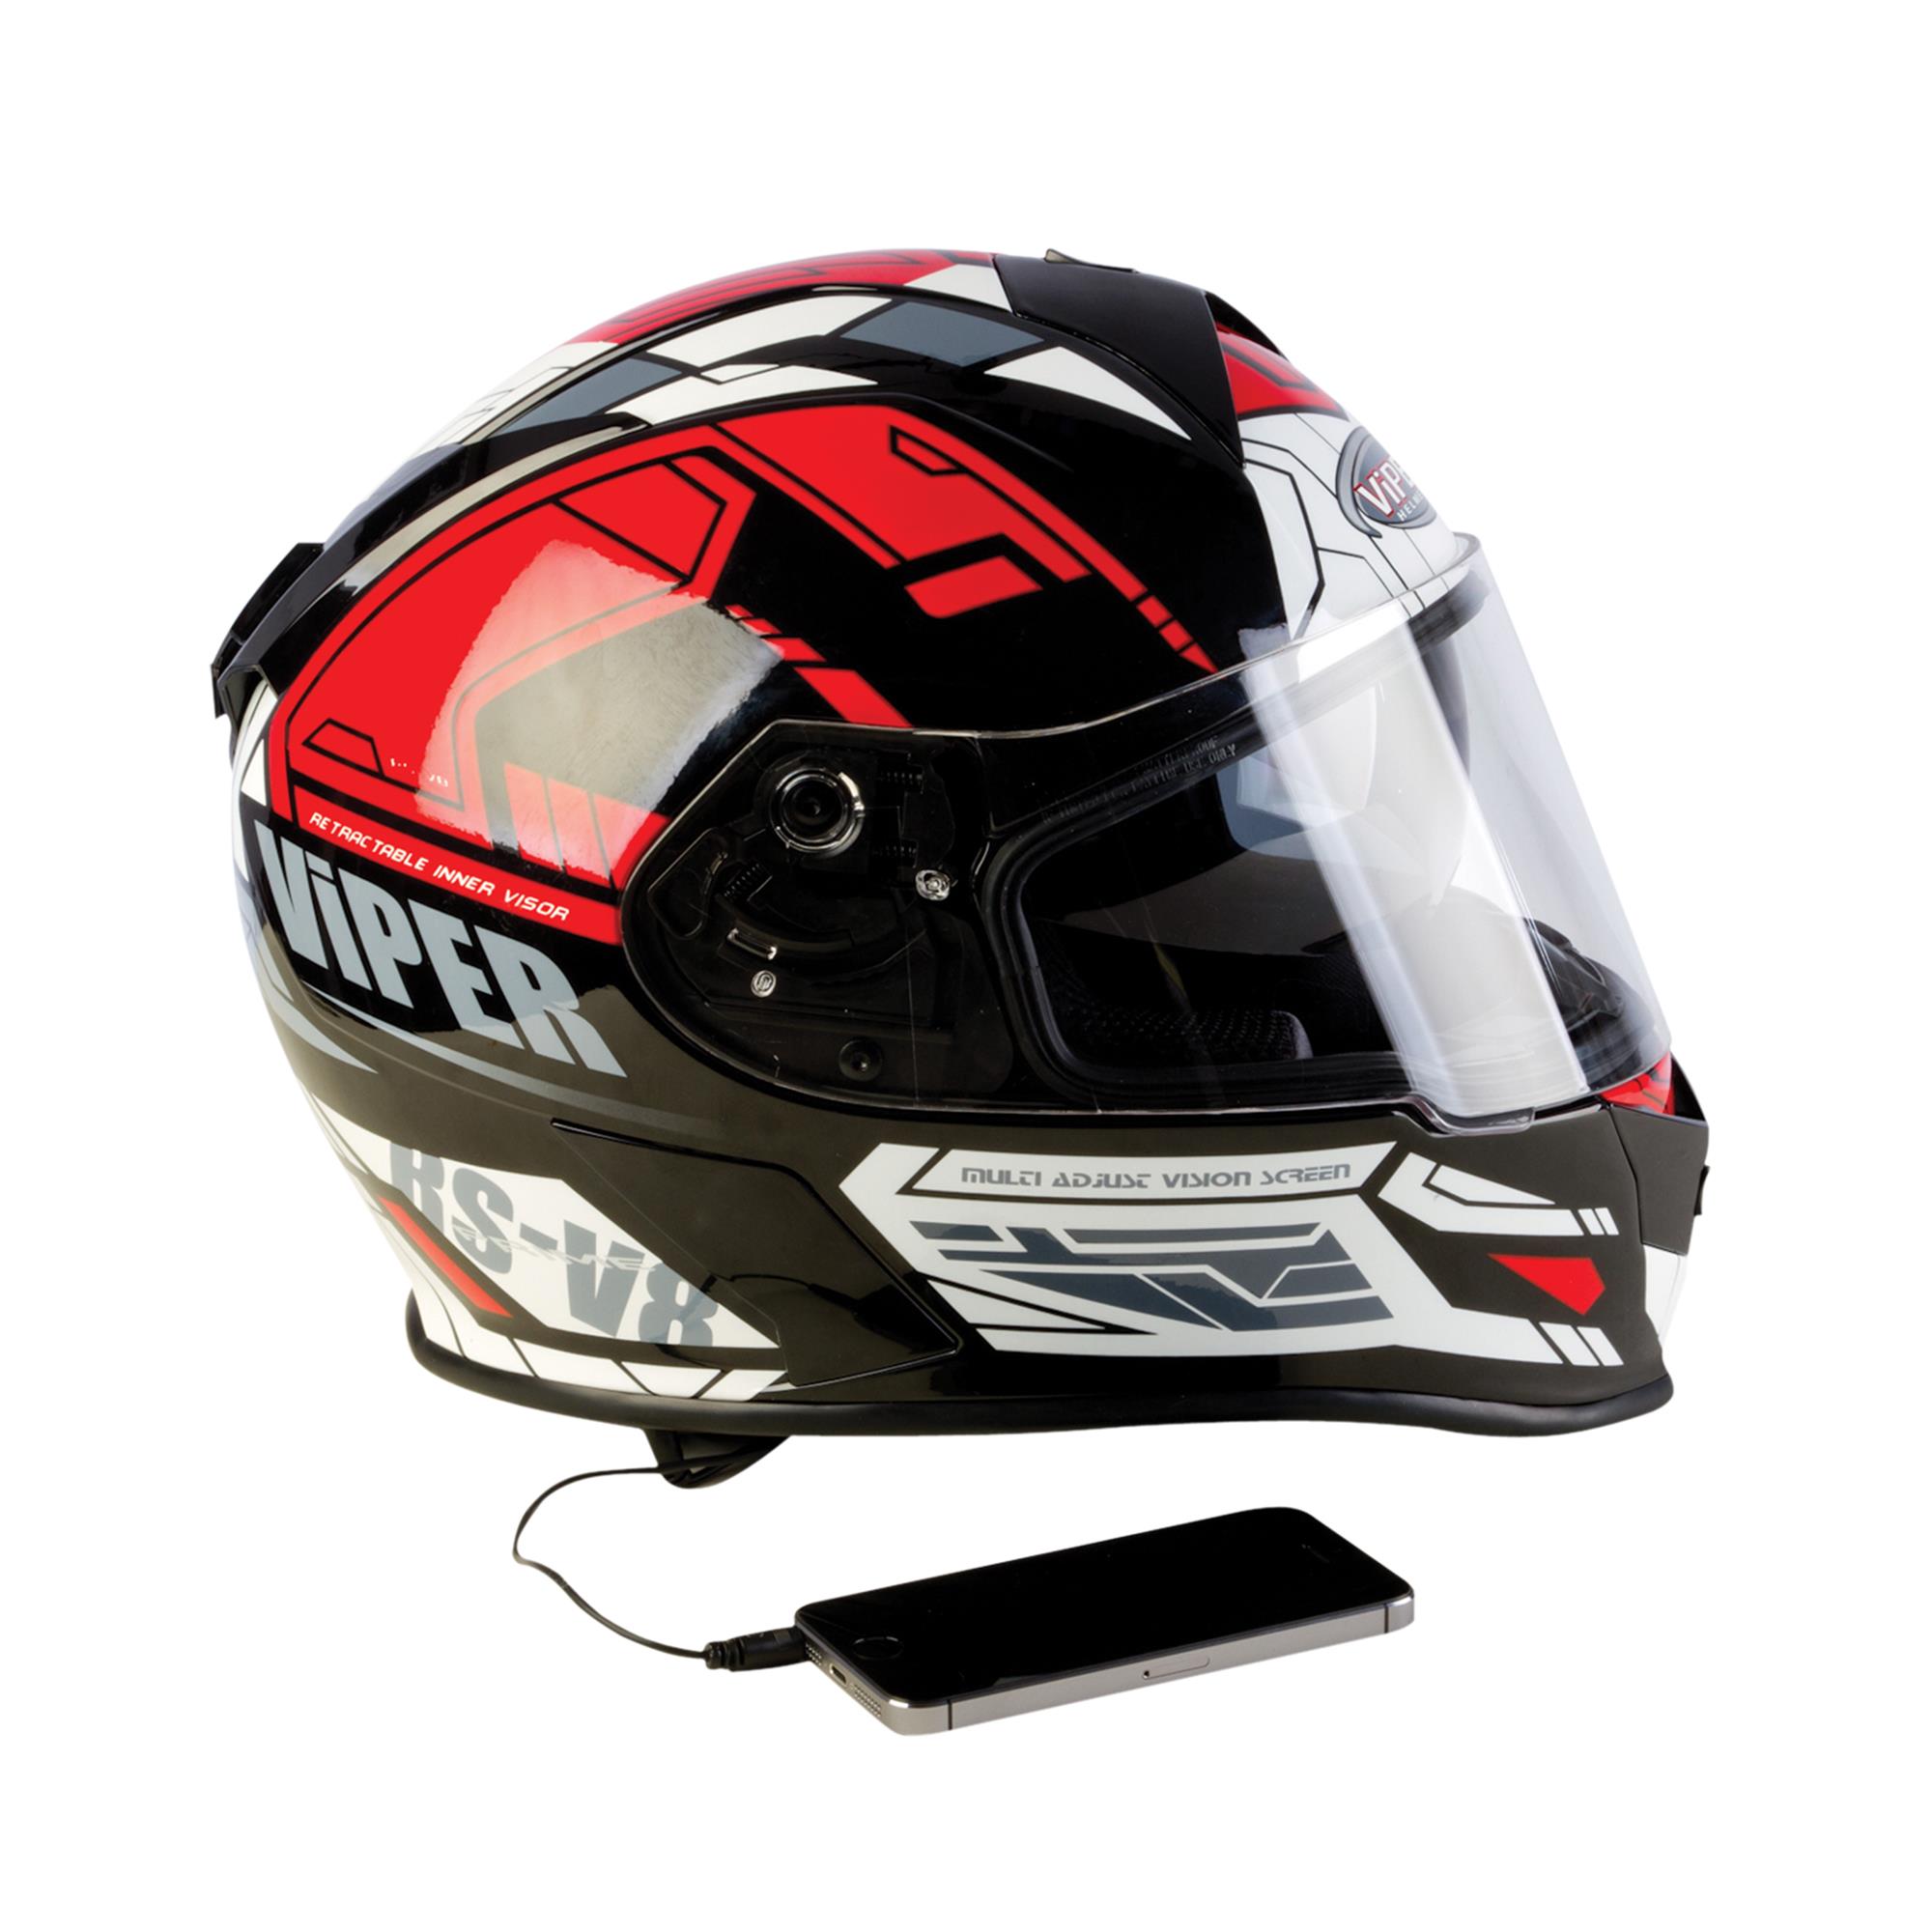 FULL FACE HELMETS WITH SPEAKERS